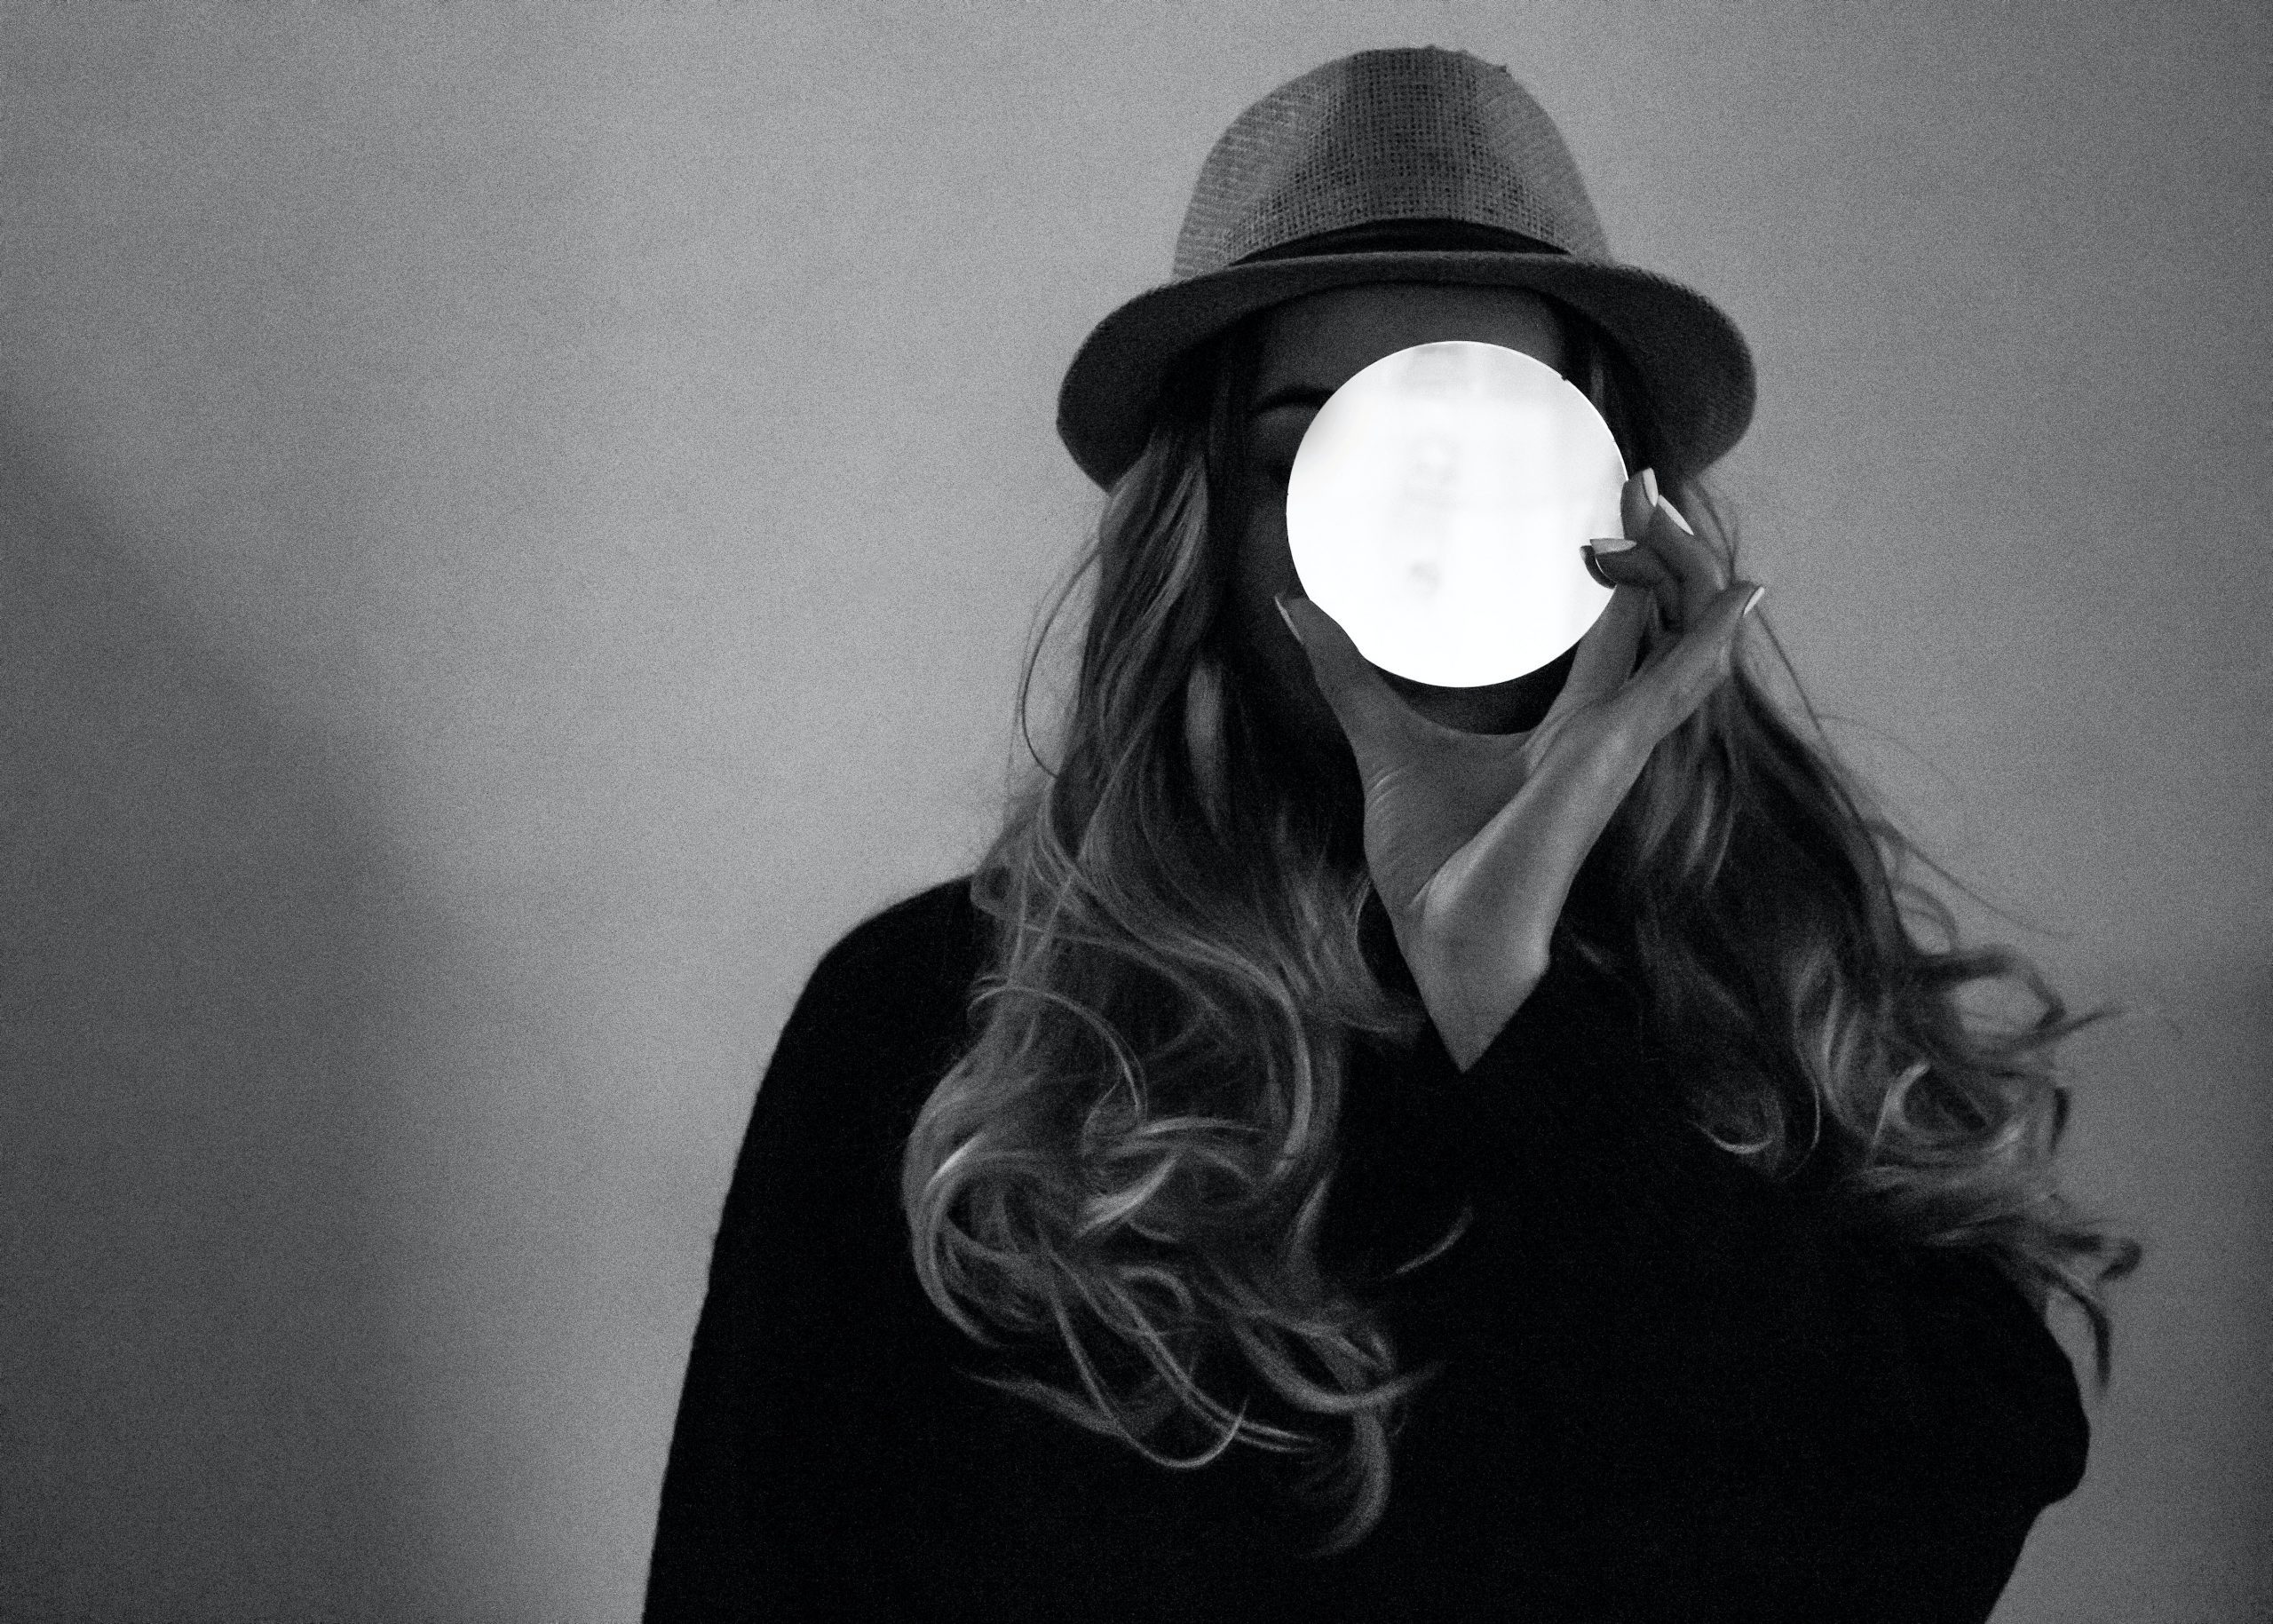 black and white photo of woman holding glowing white circle over face